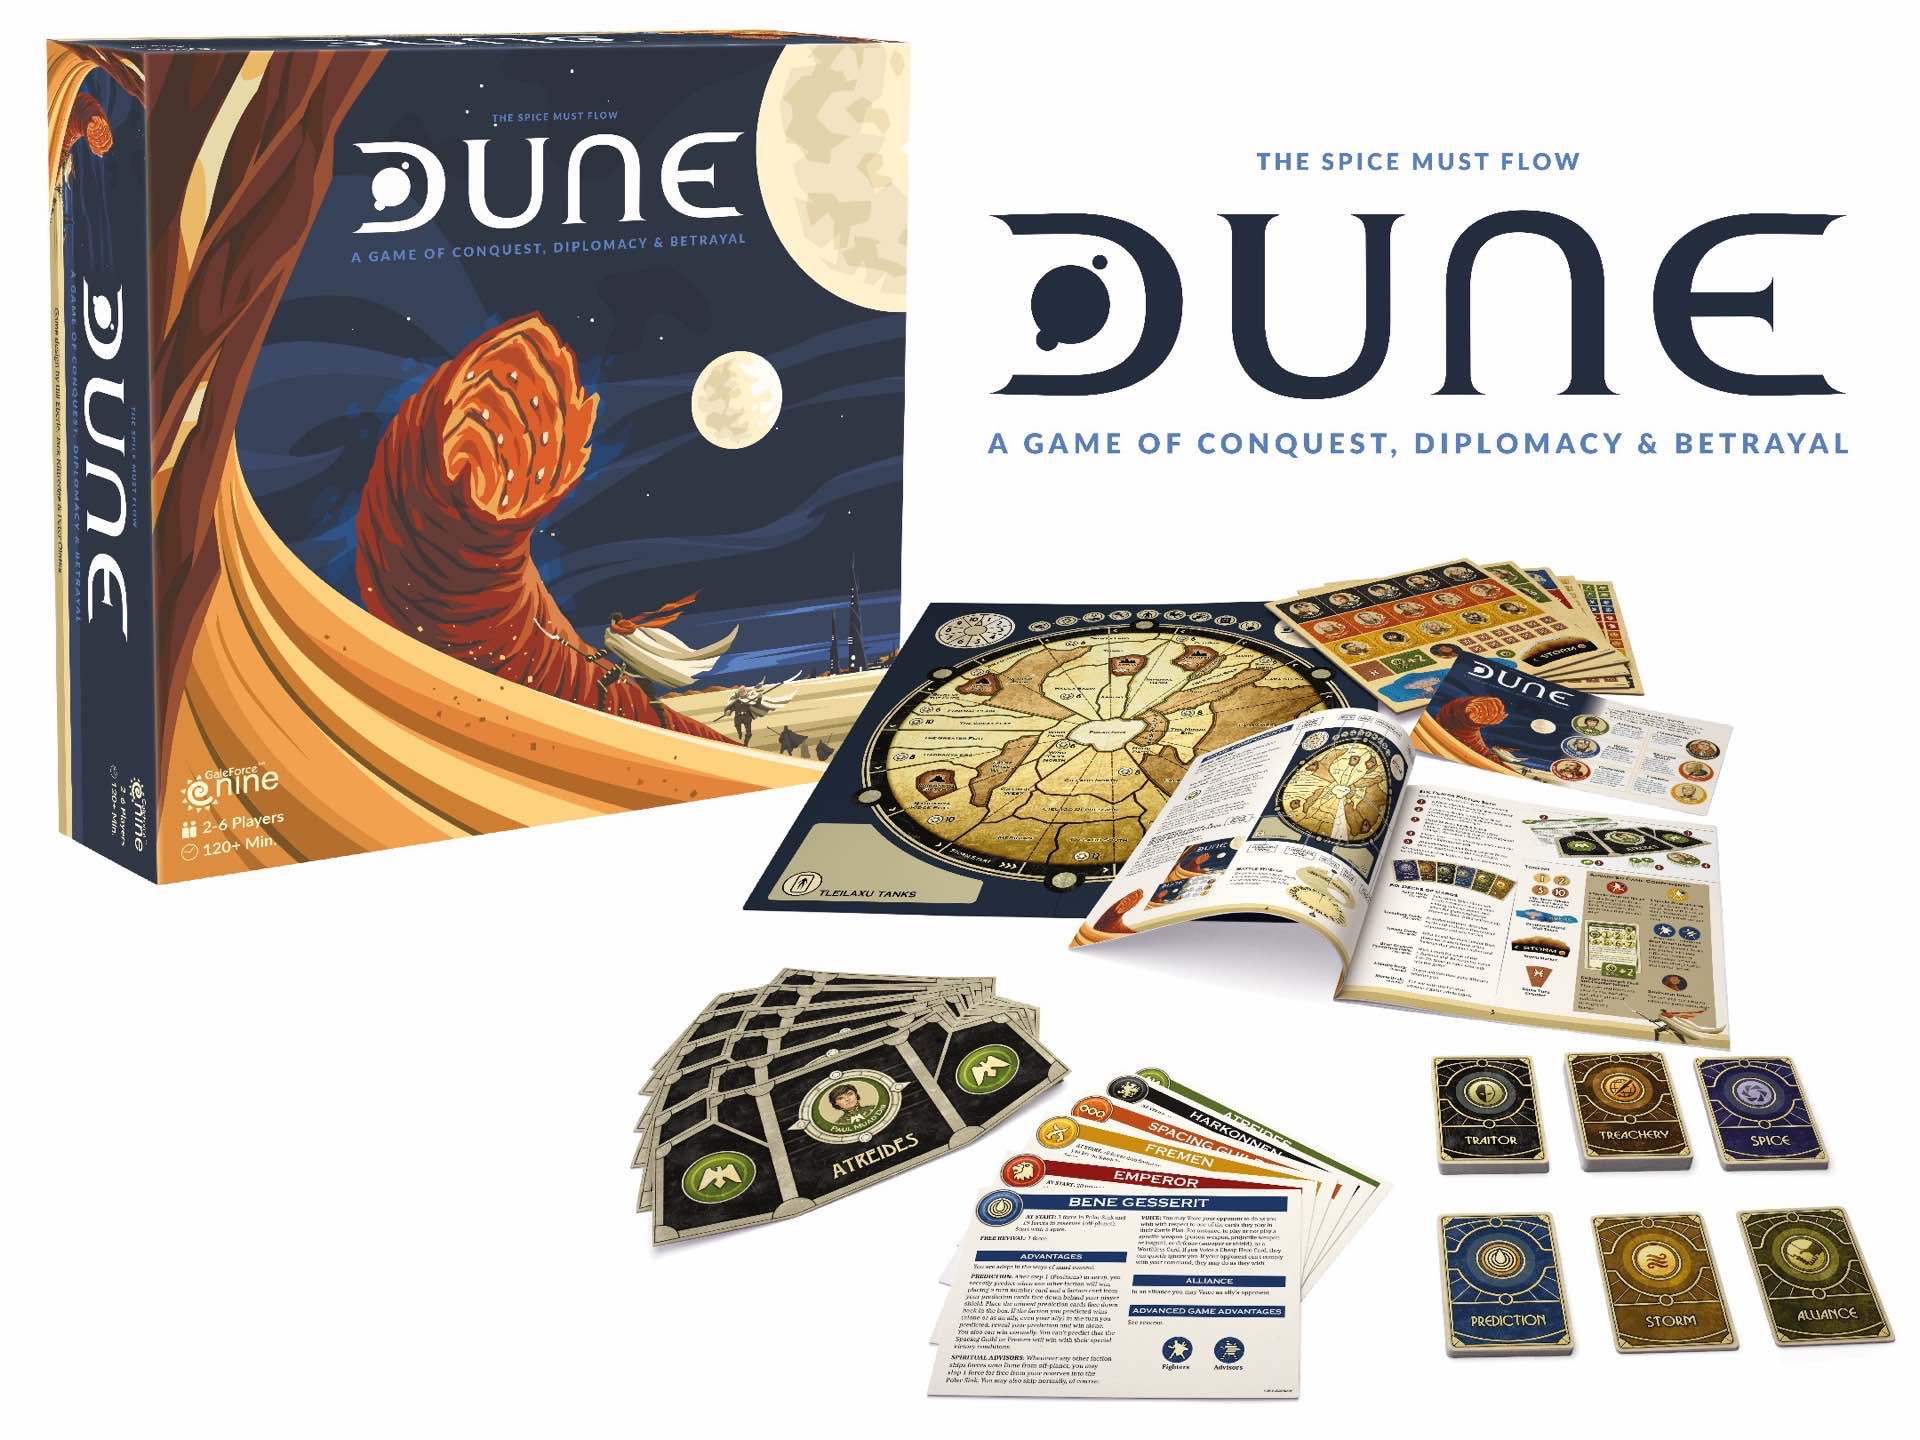 DUNE board game by Gale Force Nine. ($40 for base game, $23 for expansion set)